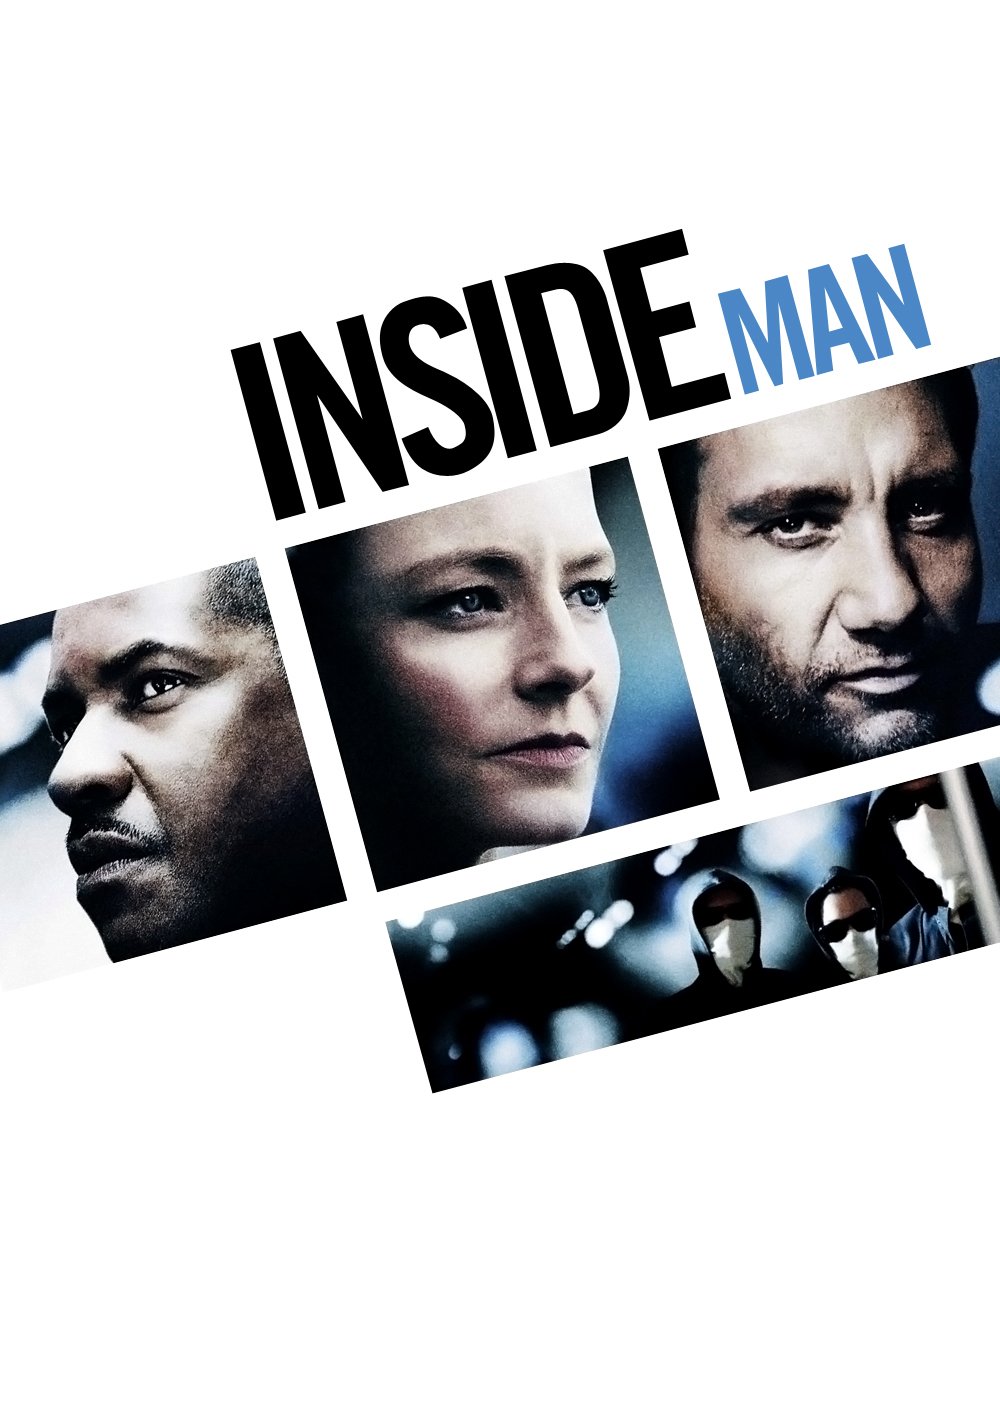 inside-man-picture-image-abyss